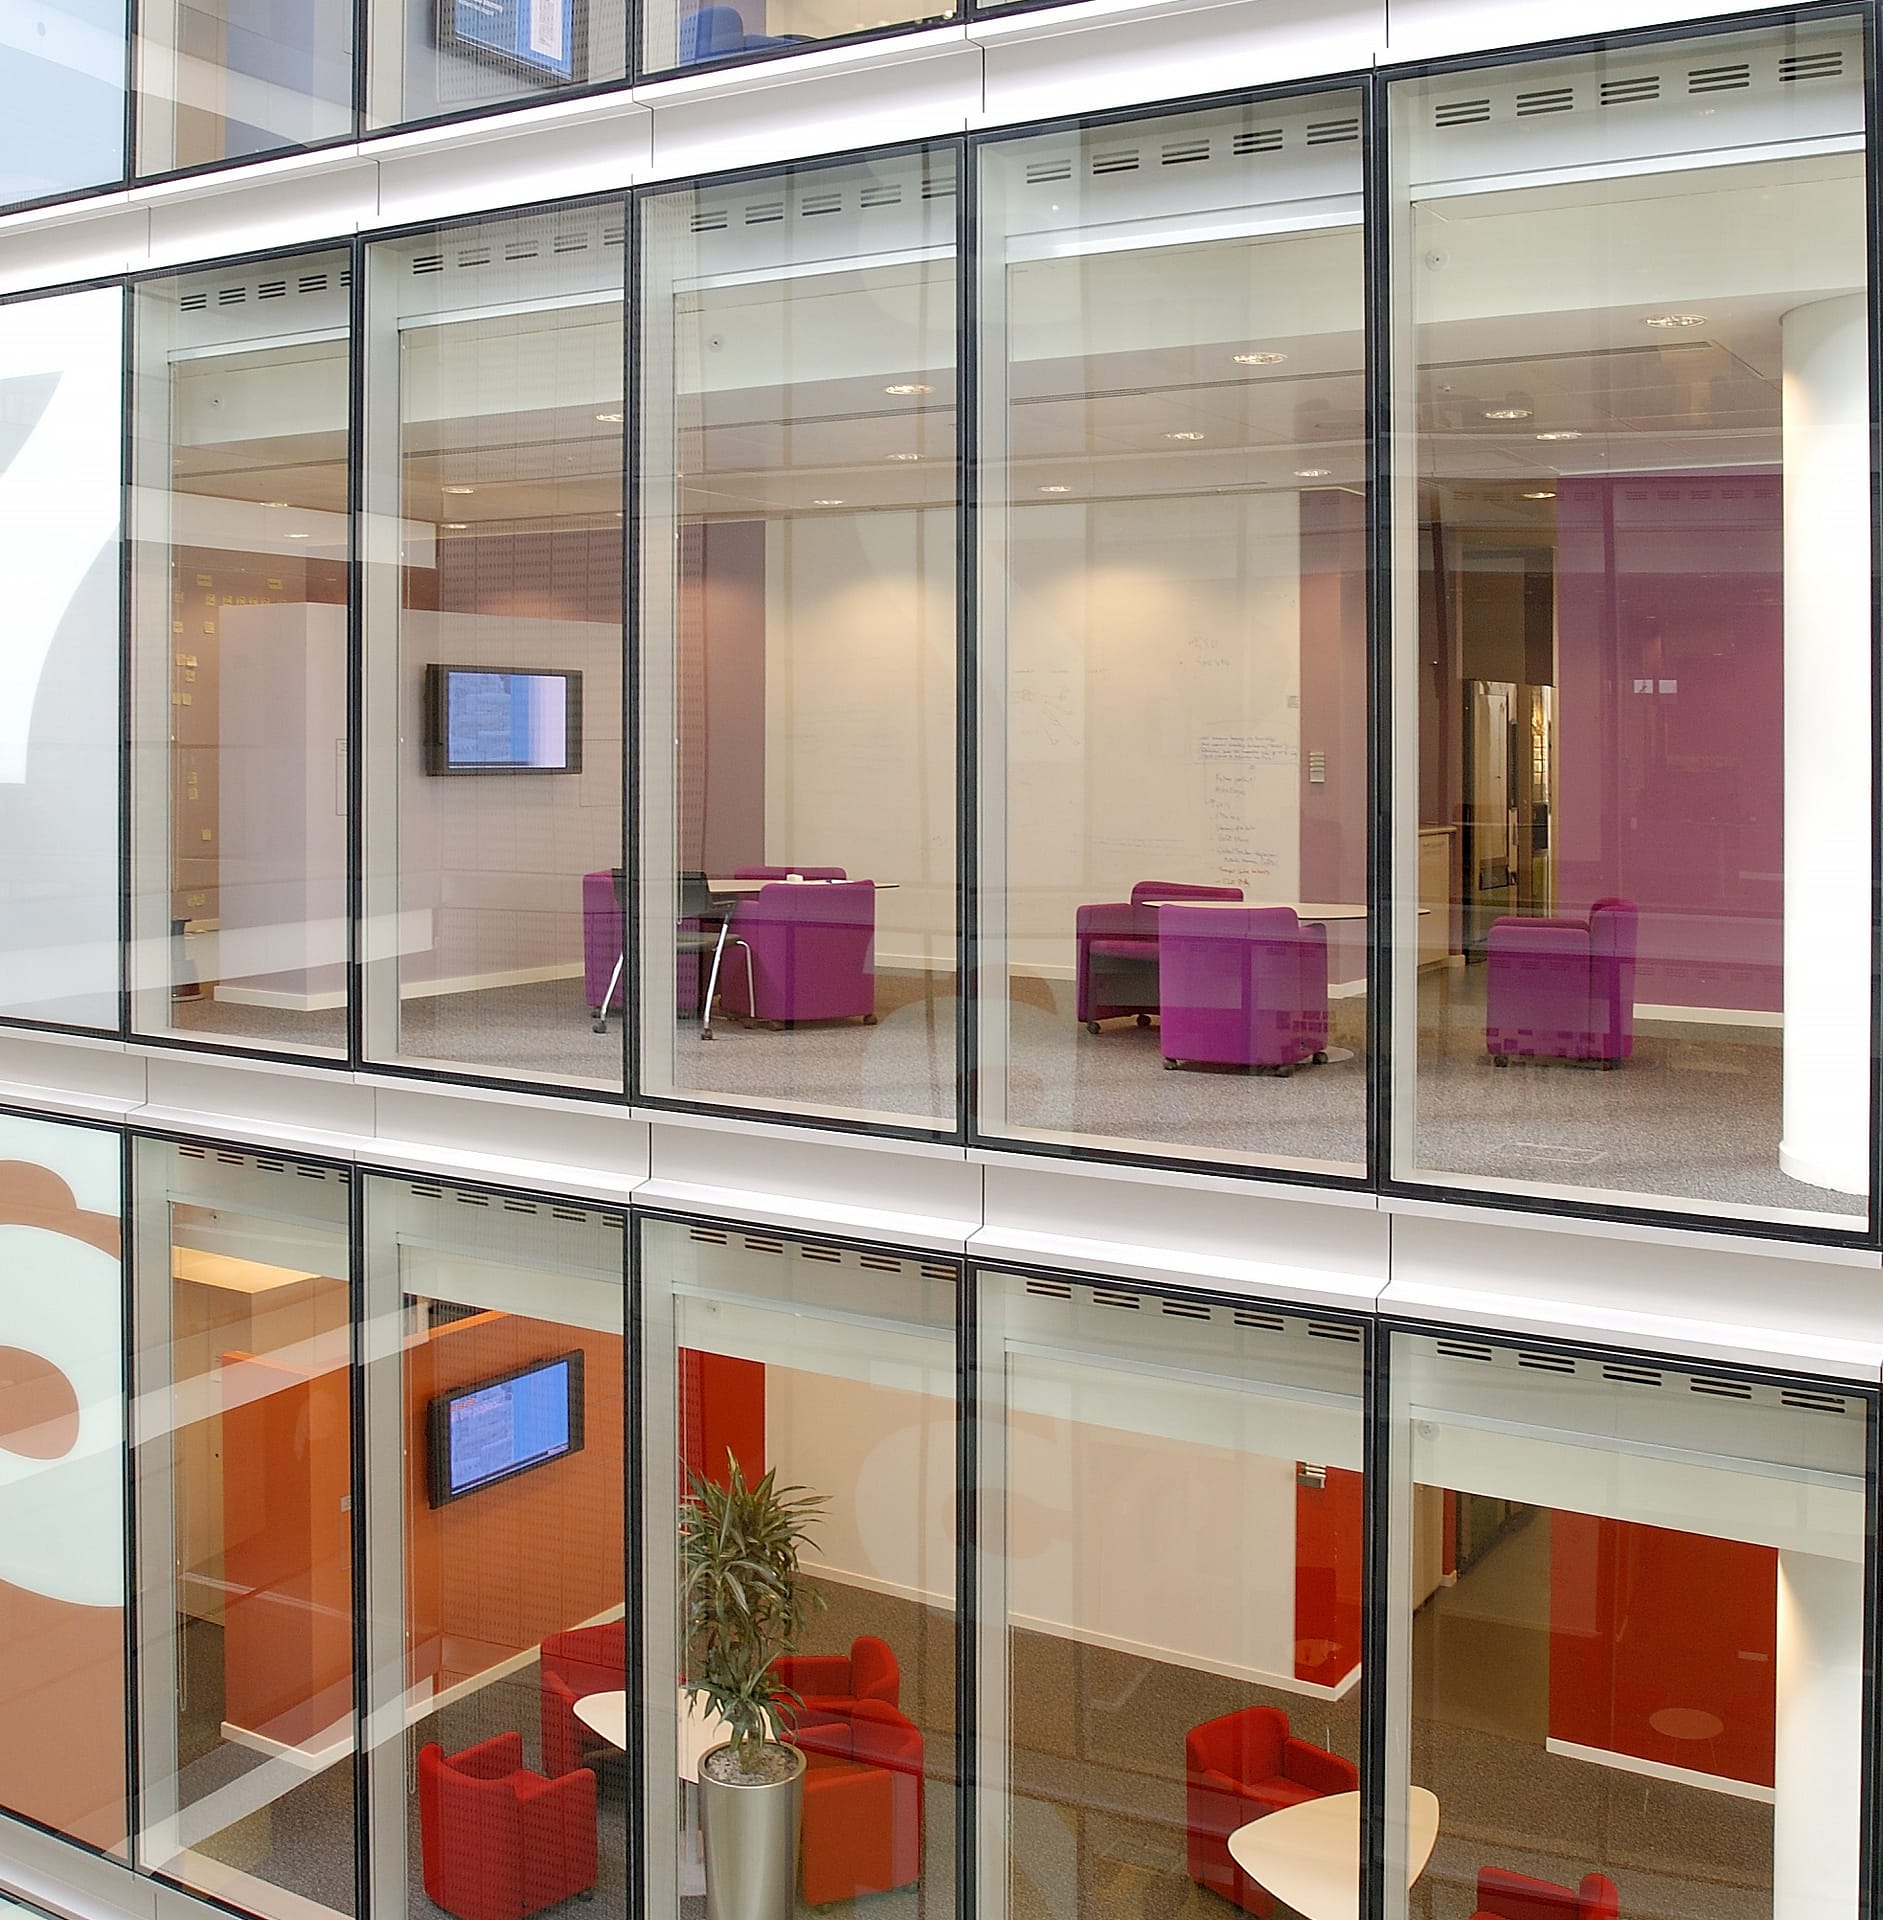 Corporate Digital Signage | An image showing digital signage on different floors within an office space through floor-to-ceiling windows